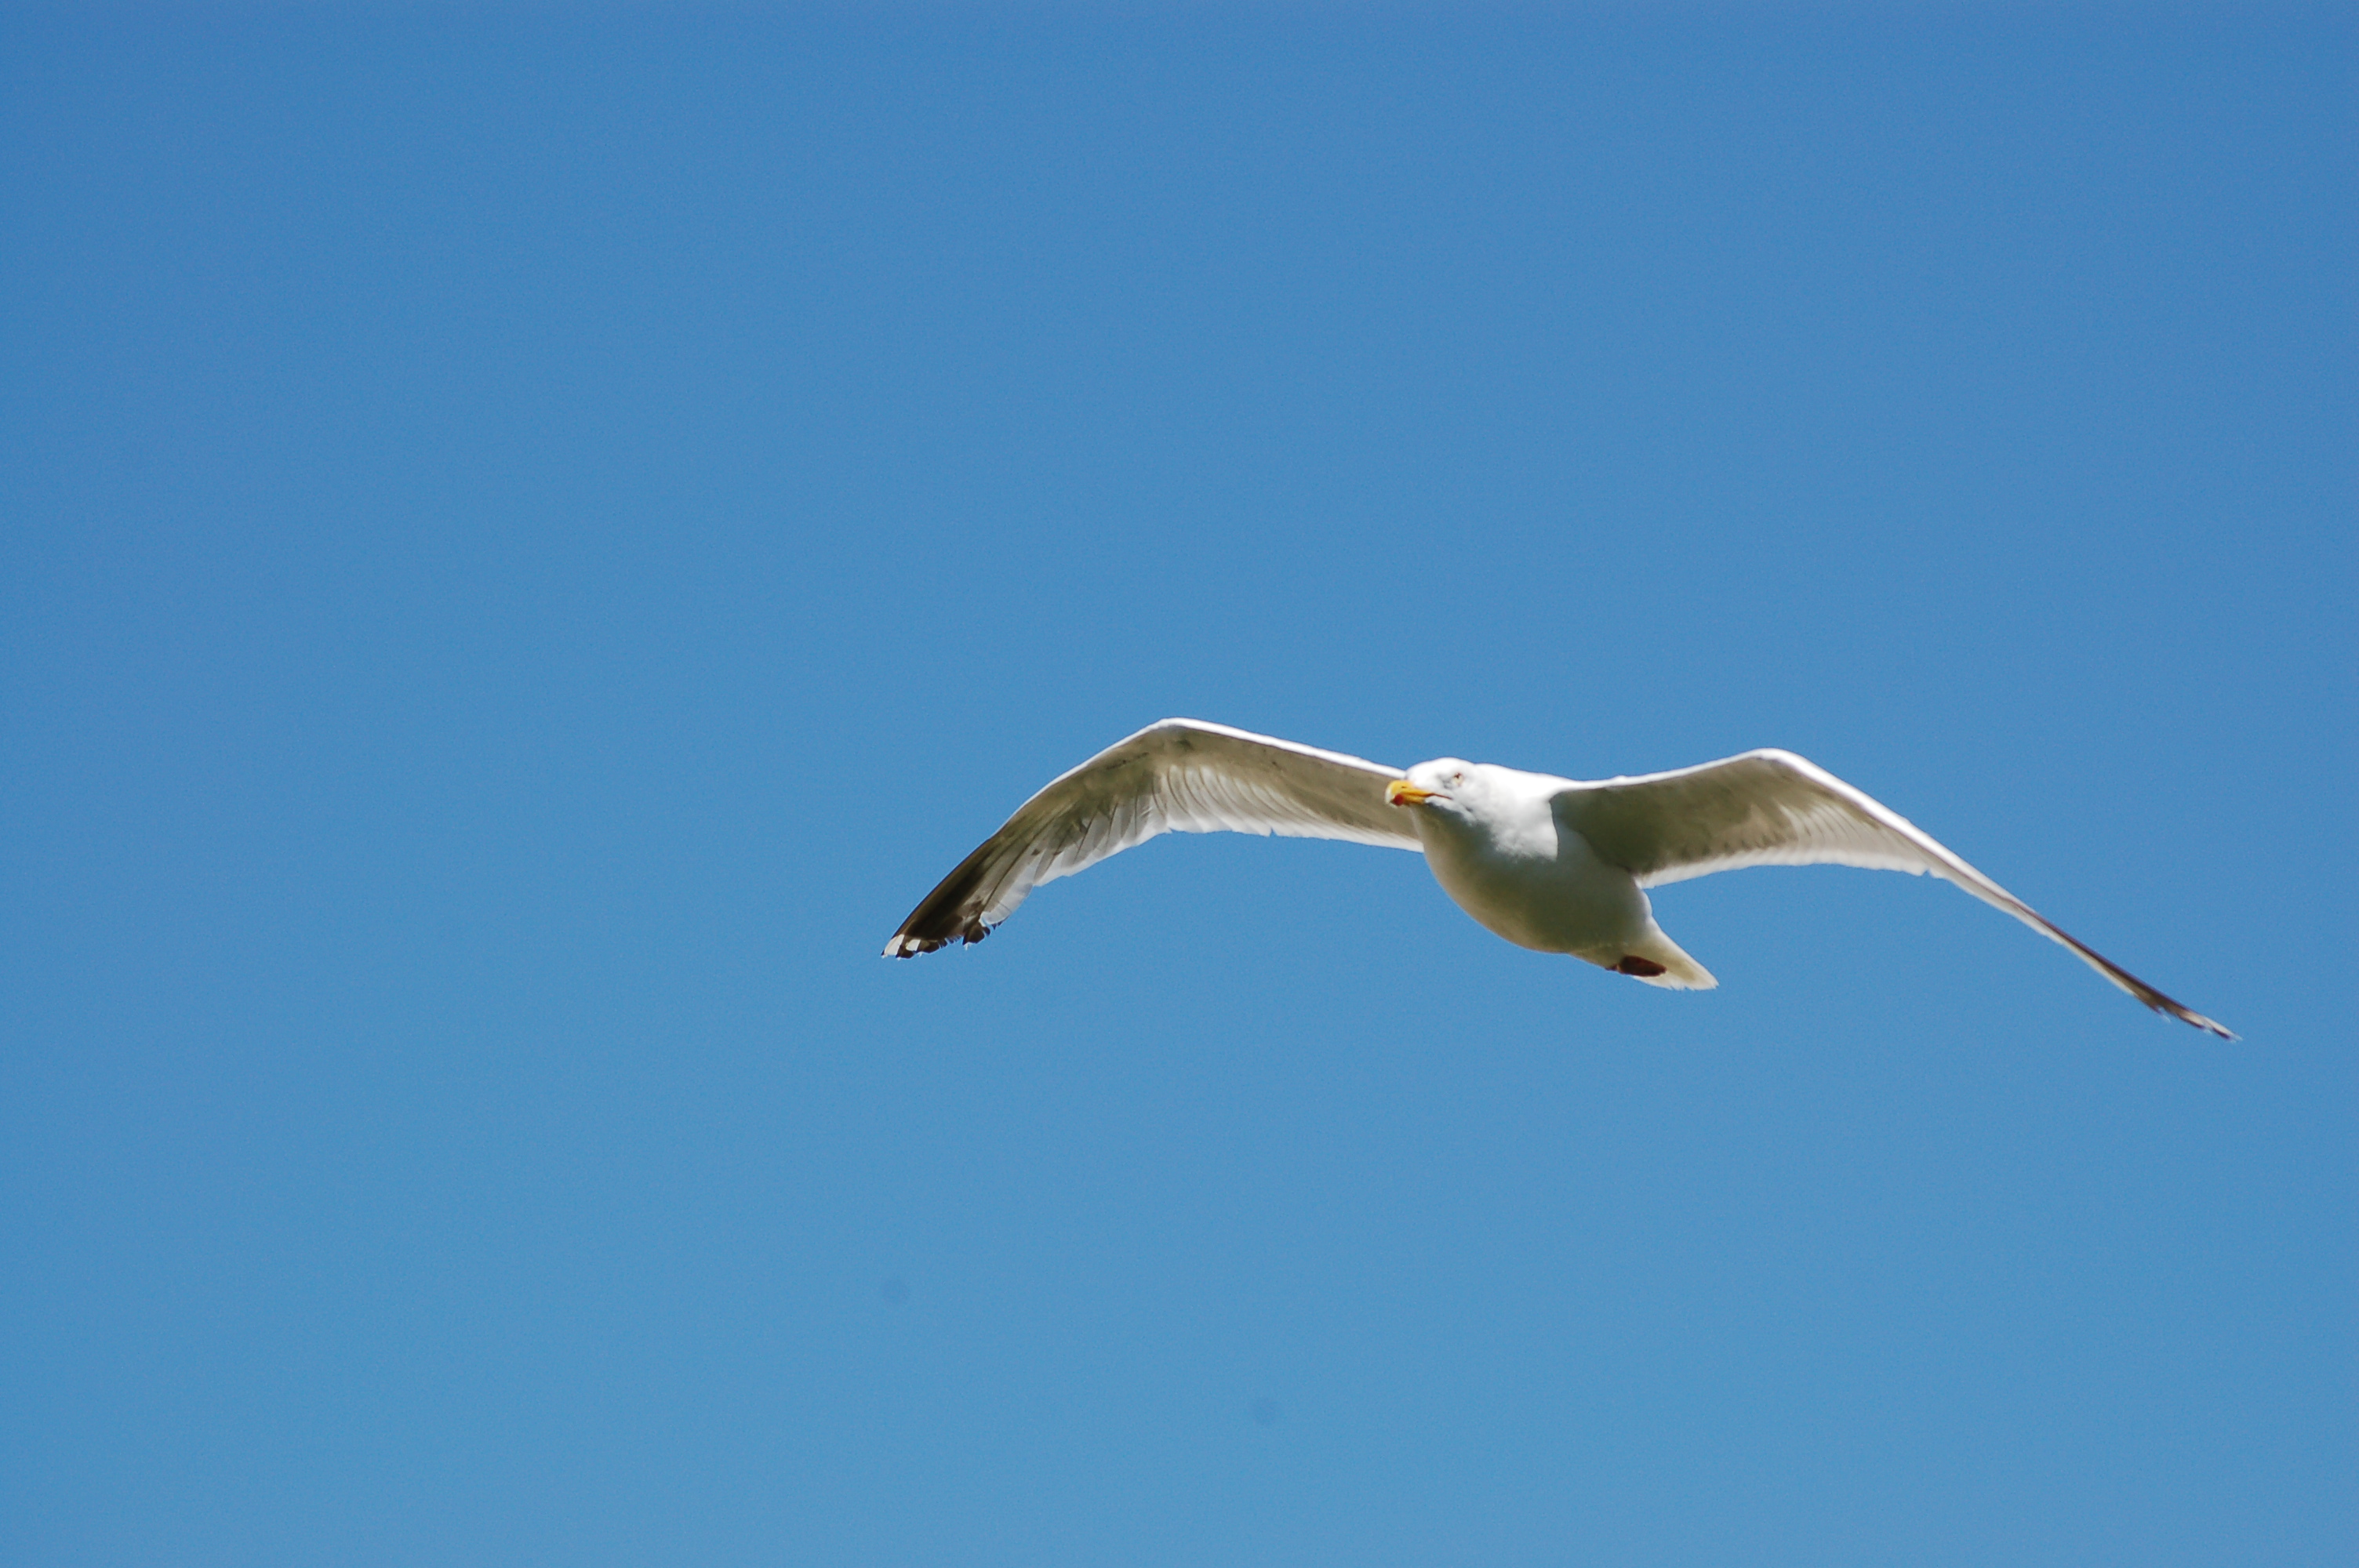 File:Seagull in flight with blue backgound.JPG - Wikimedia Commons